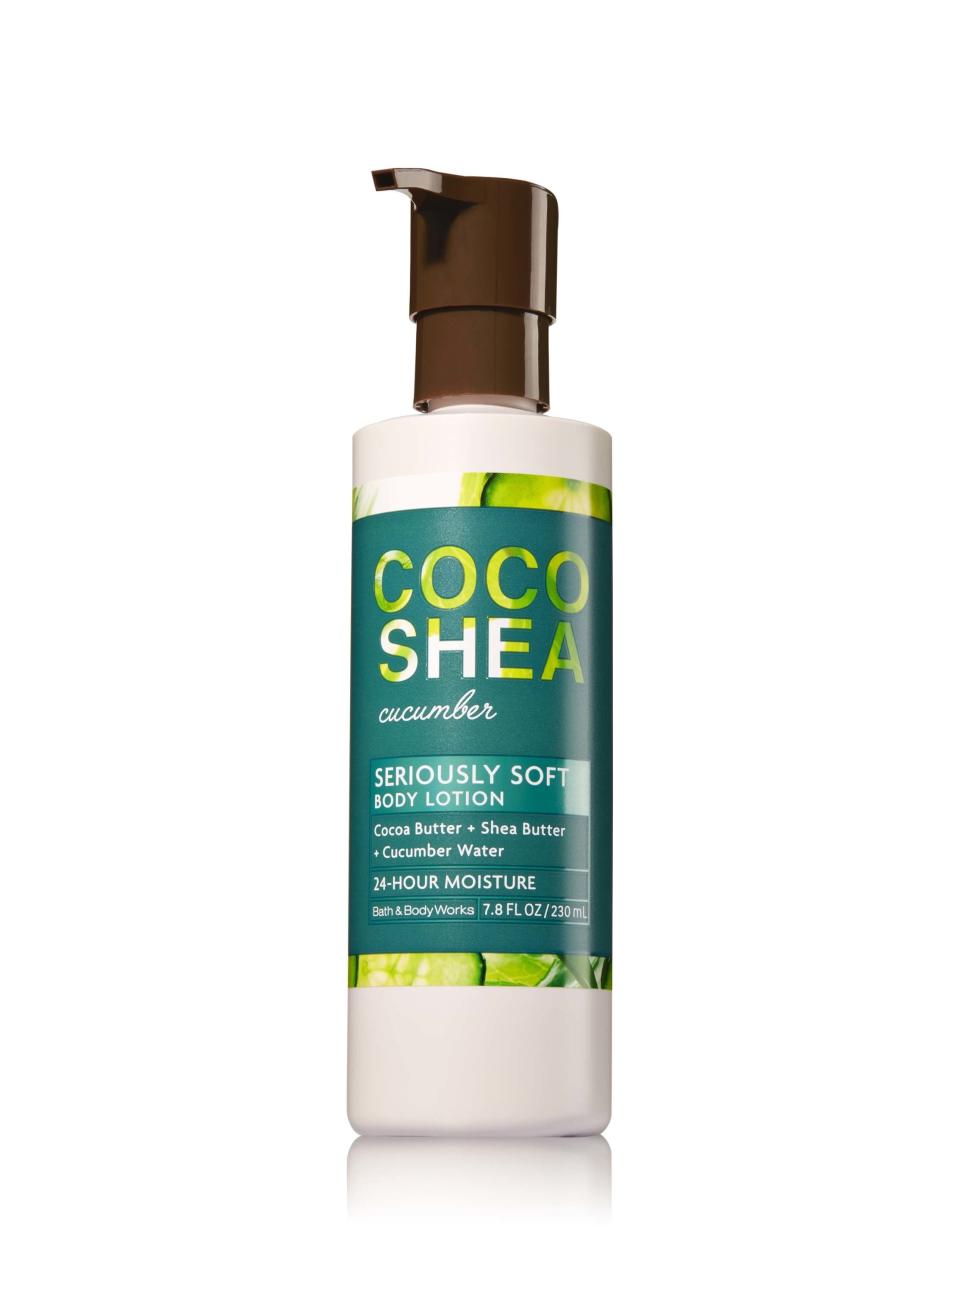 Bath & Body Works's new Coco Shea Cucumber product in its Coco Shea Line will give you Cucumber Melon vibes.